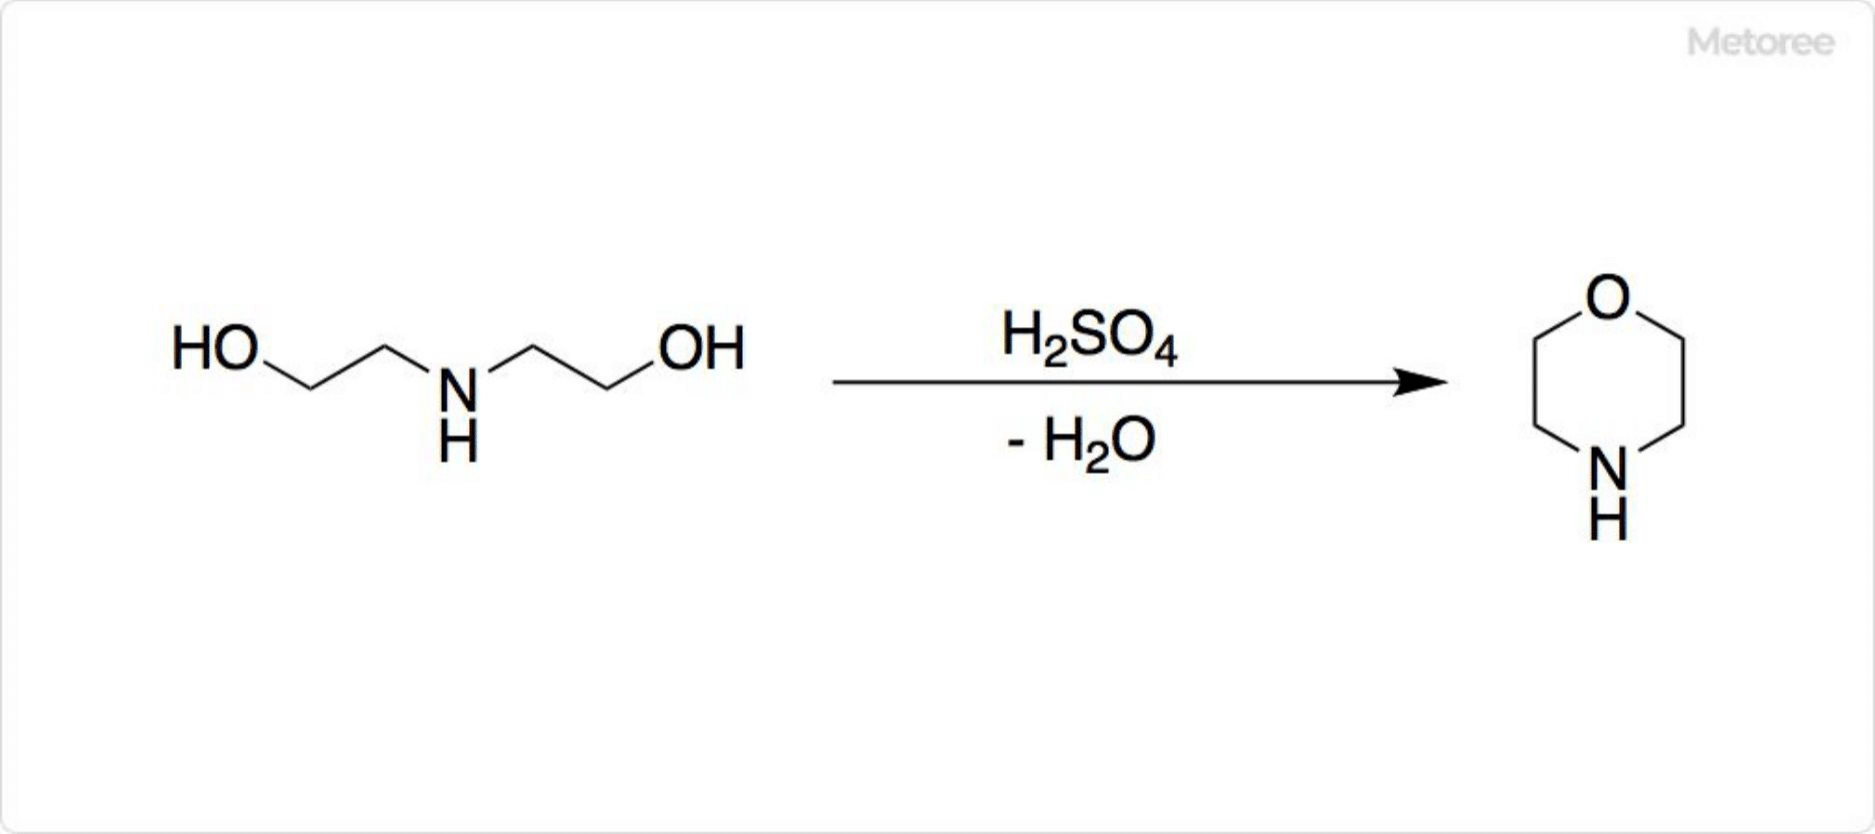 Figure 2. Synthesis of morpholine